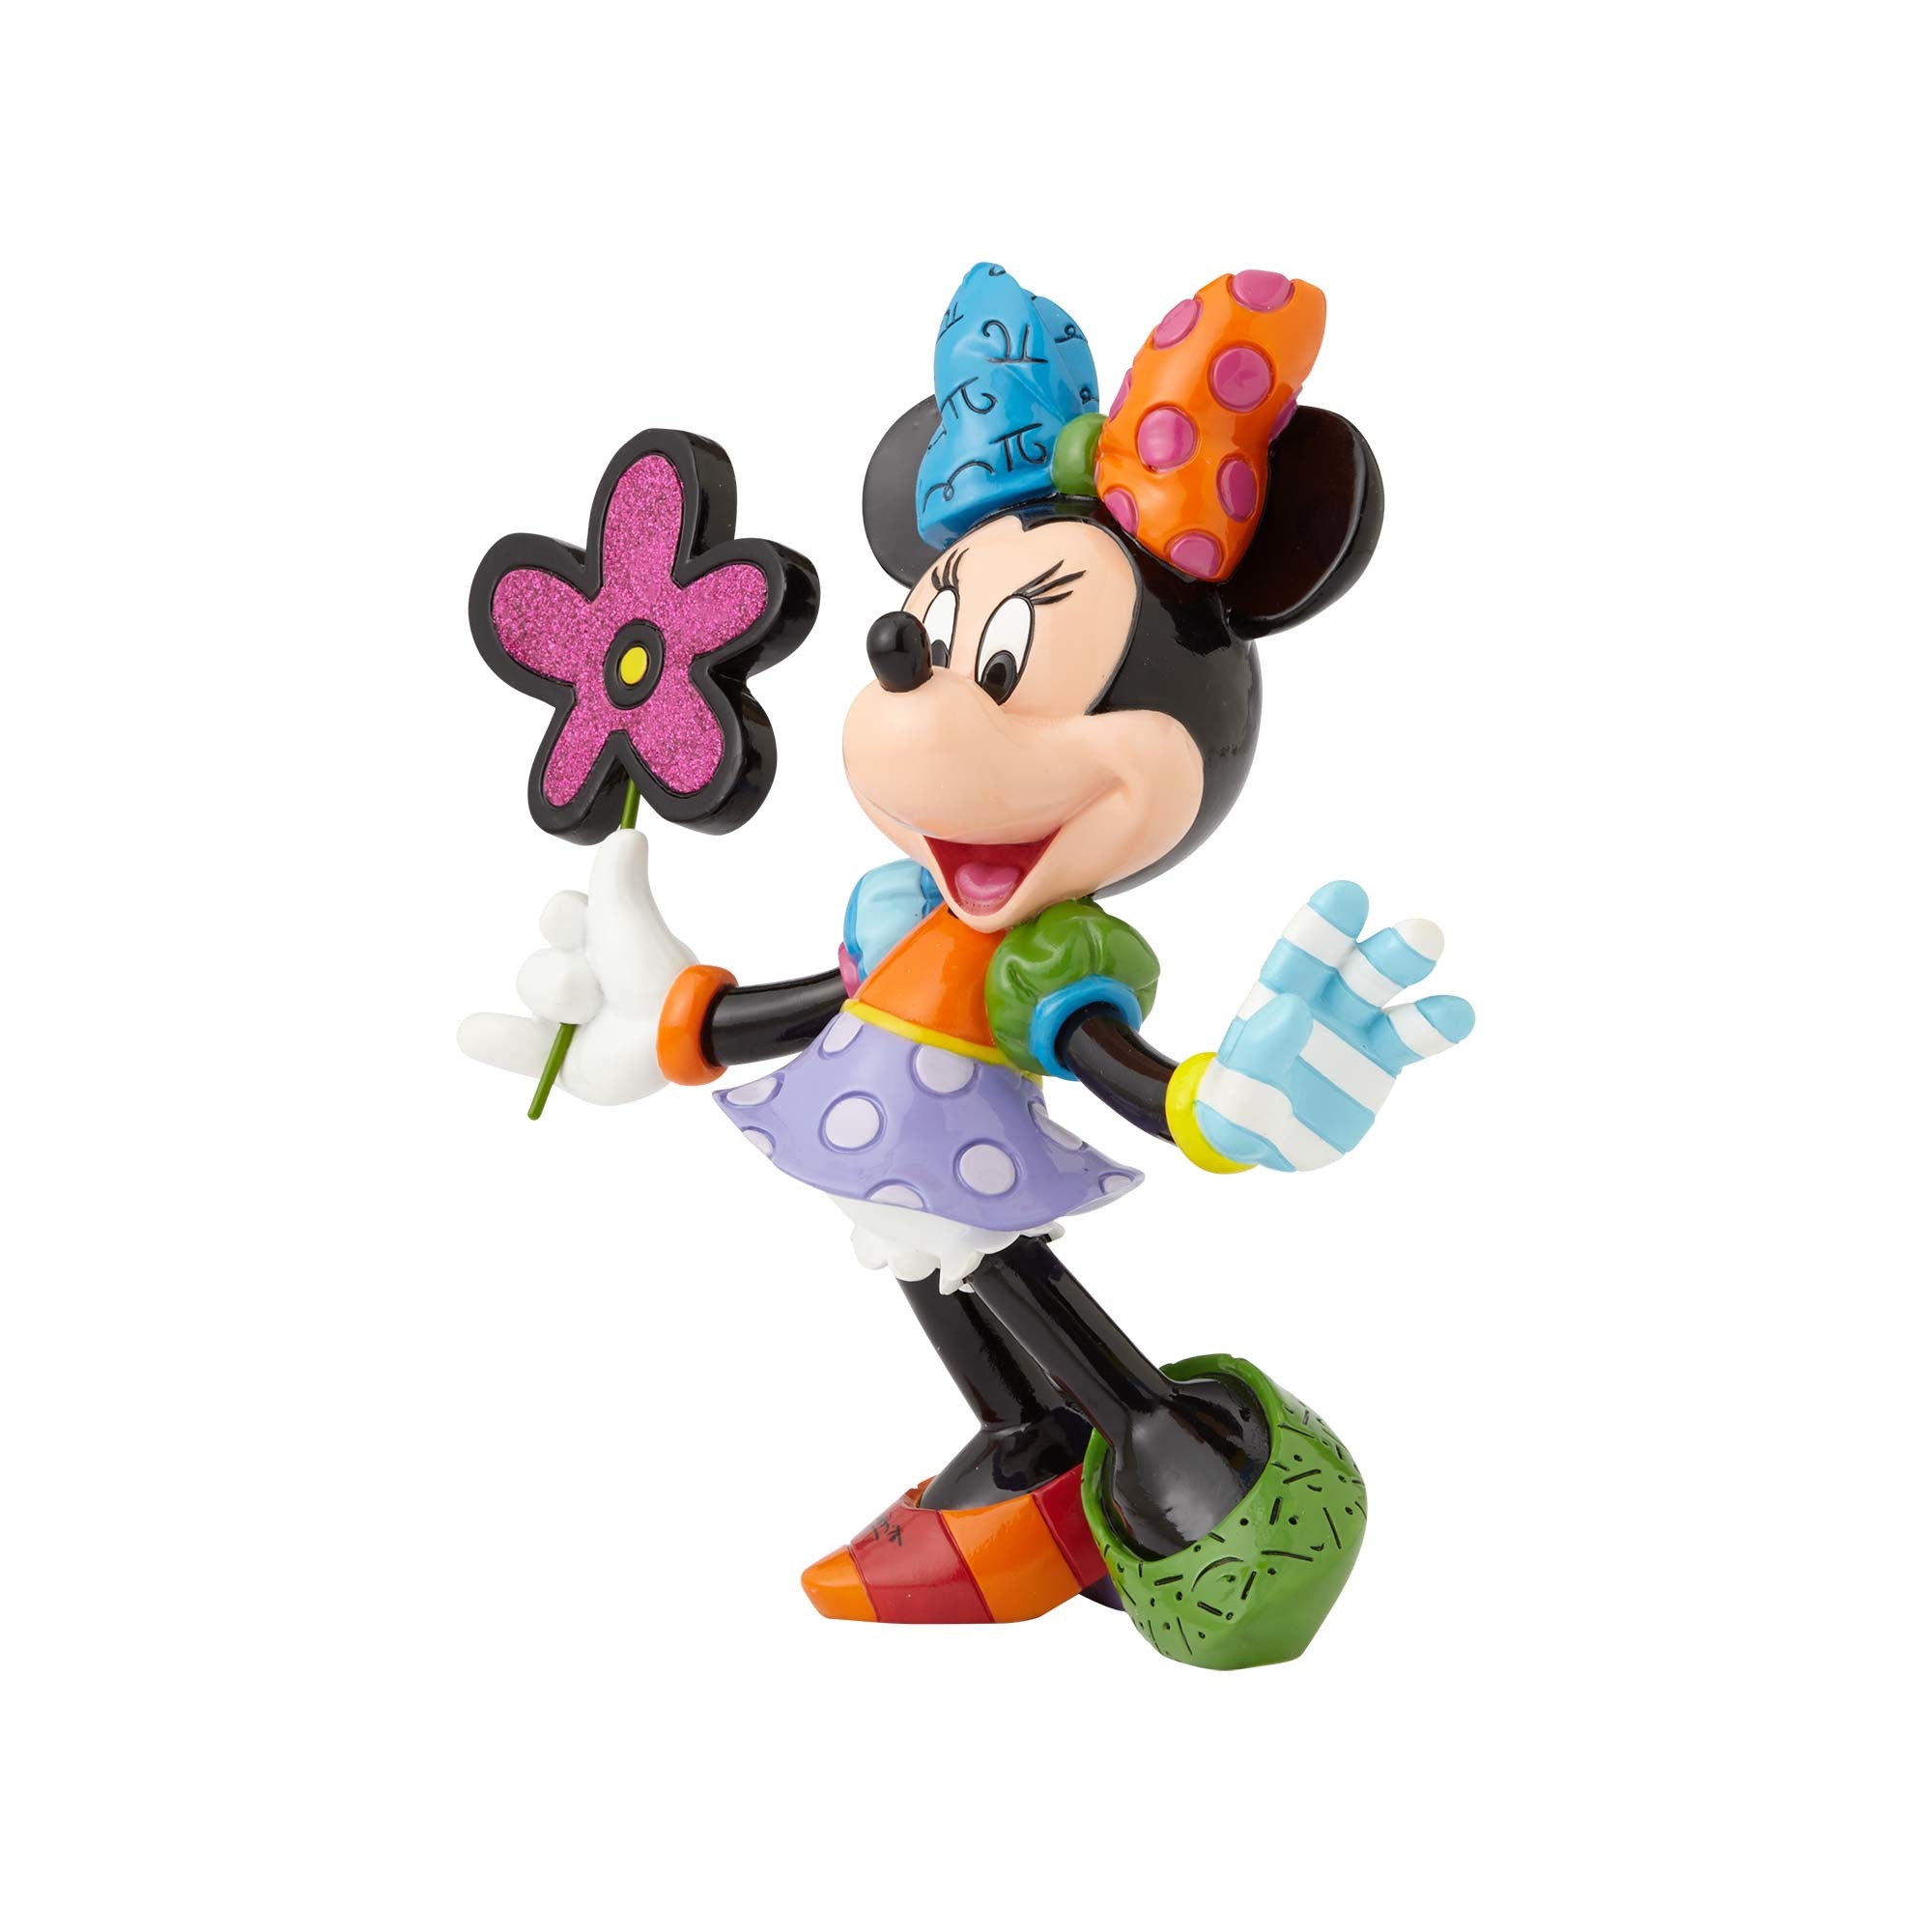 BRAND NEW DISNEY BRITTO- MINNIE WITH FLOWERS 4058181 BOXED 